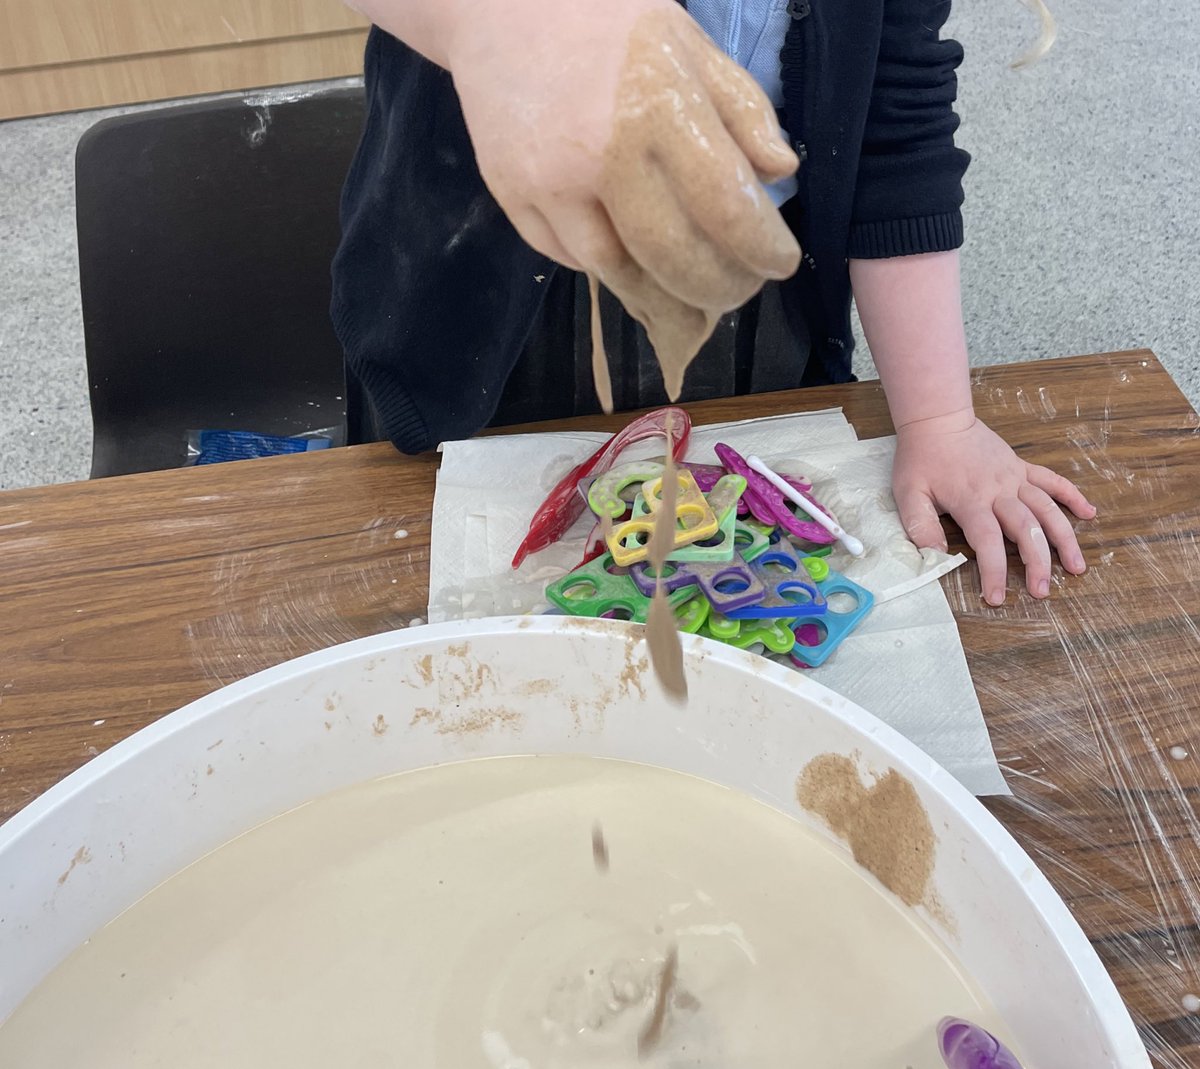 Dino Number Dig 🦕 @MissHughesUoG Added numbers & numicons to oobleck & sand to create a number dig. P1 started with tongs but then decided it was much more fun with hands! 🙌🏽 #maths #number #play #mathsisfun #numicons #sensoryplay
#playtray #eyfs #dinoplay #oobleckplay #p1a #fun